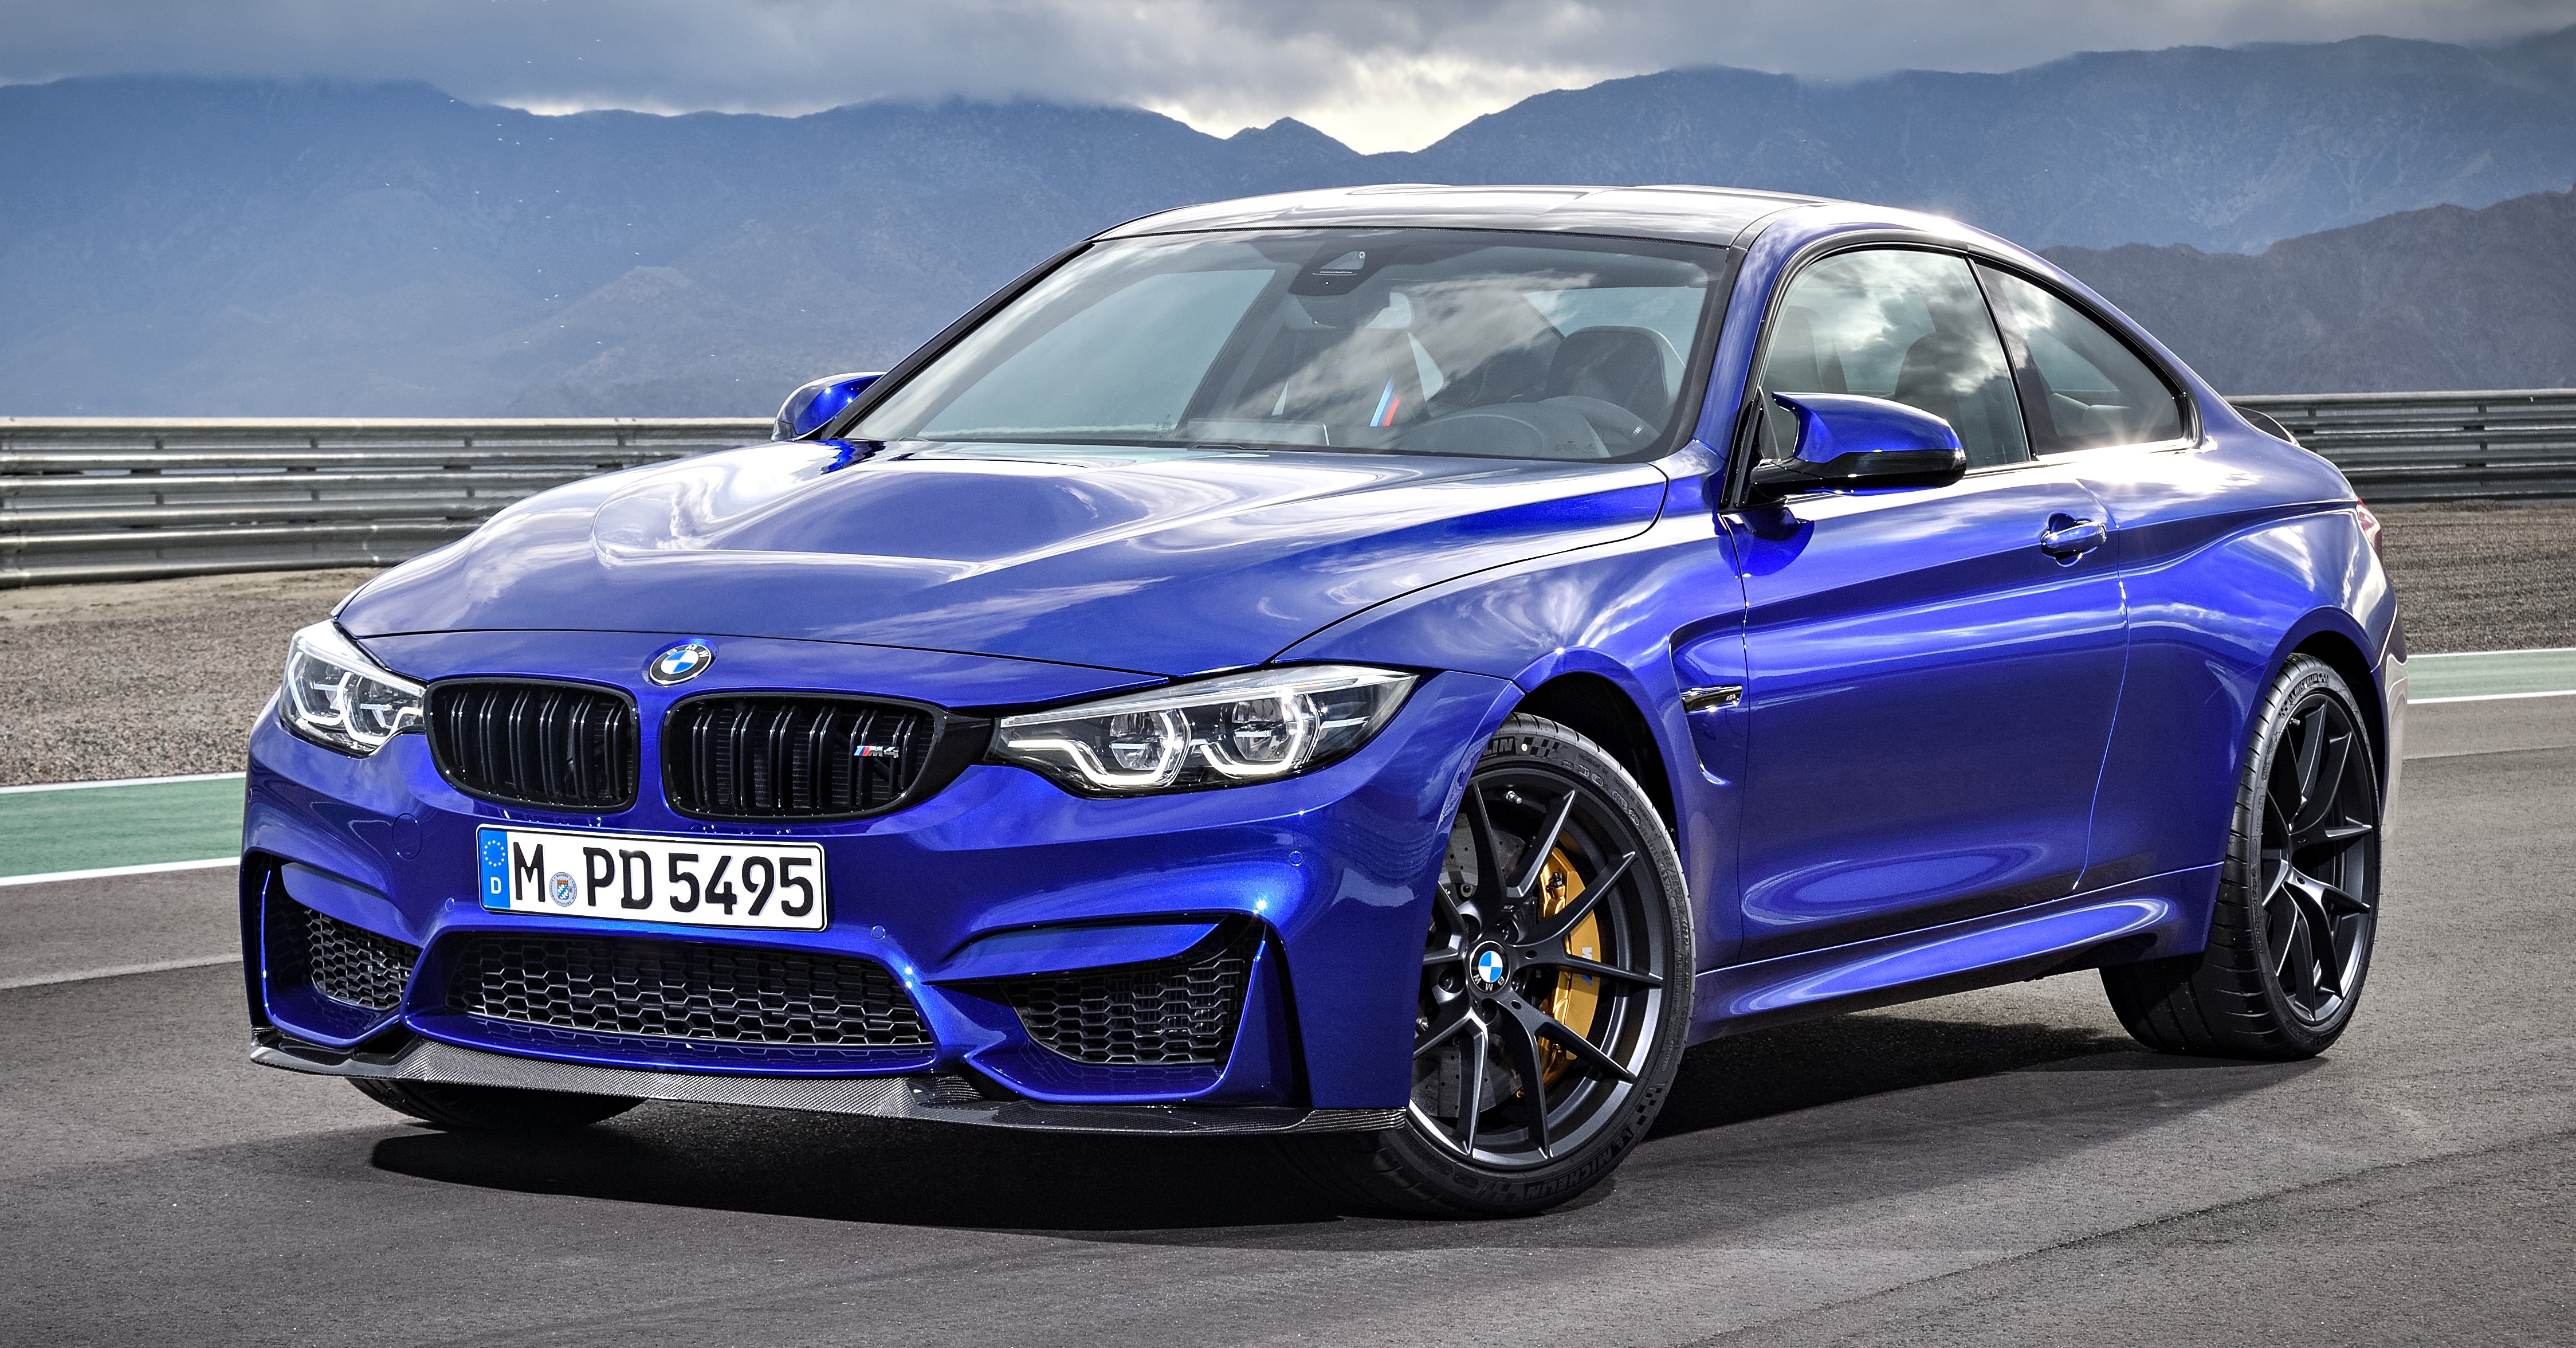 Bmw M4 Cs Revealed With 460 Hp, M4 Gts Styling - Paultan.Org